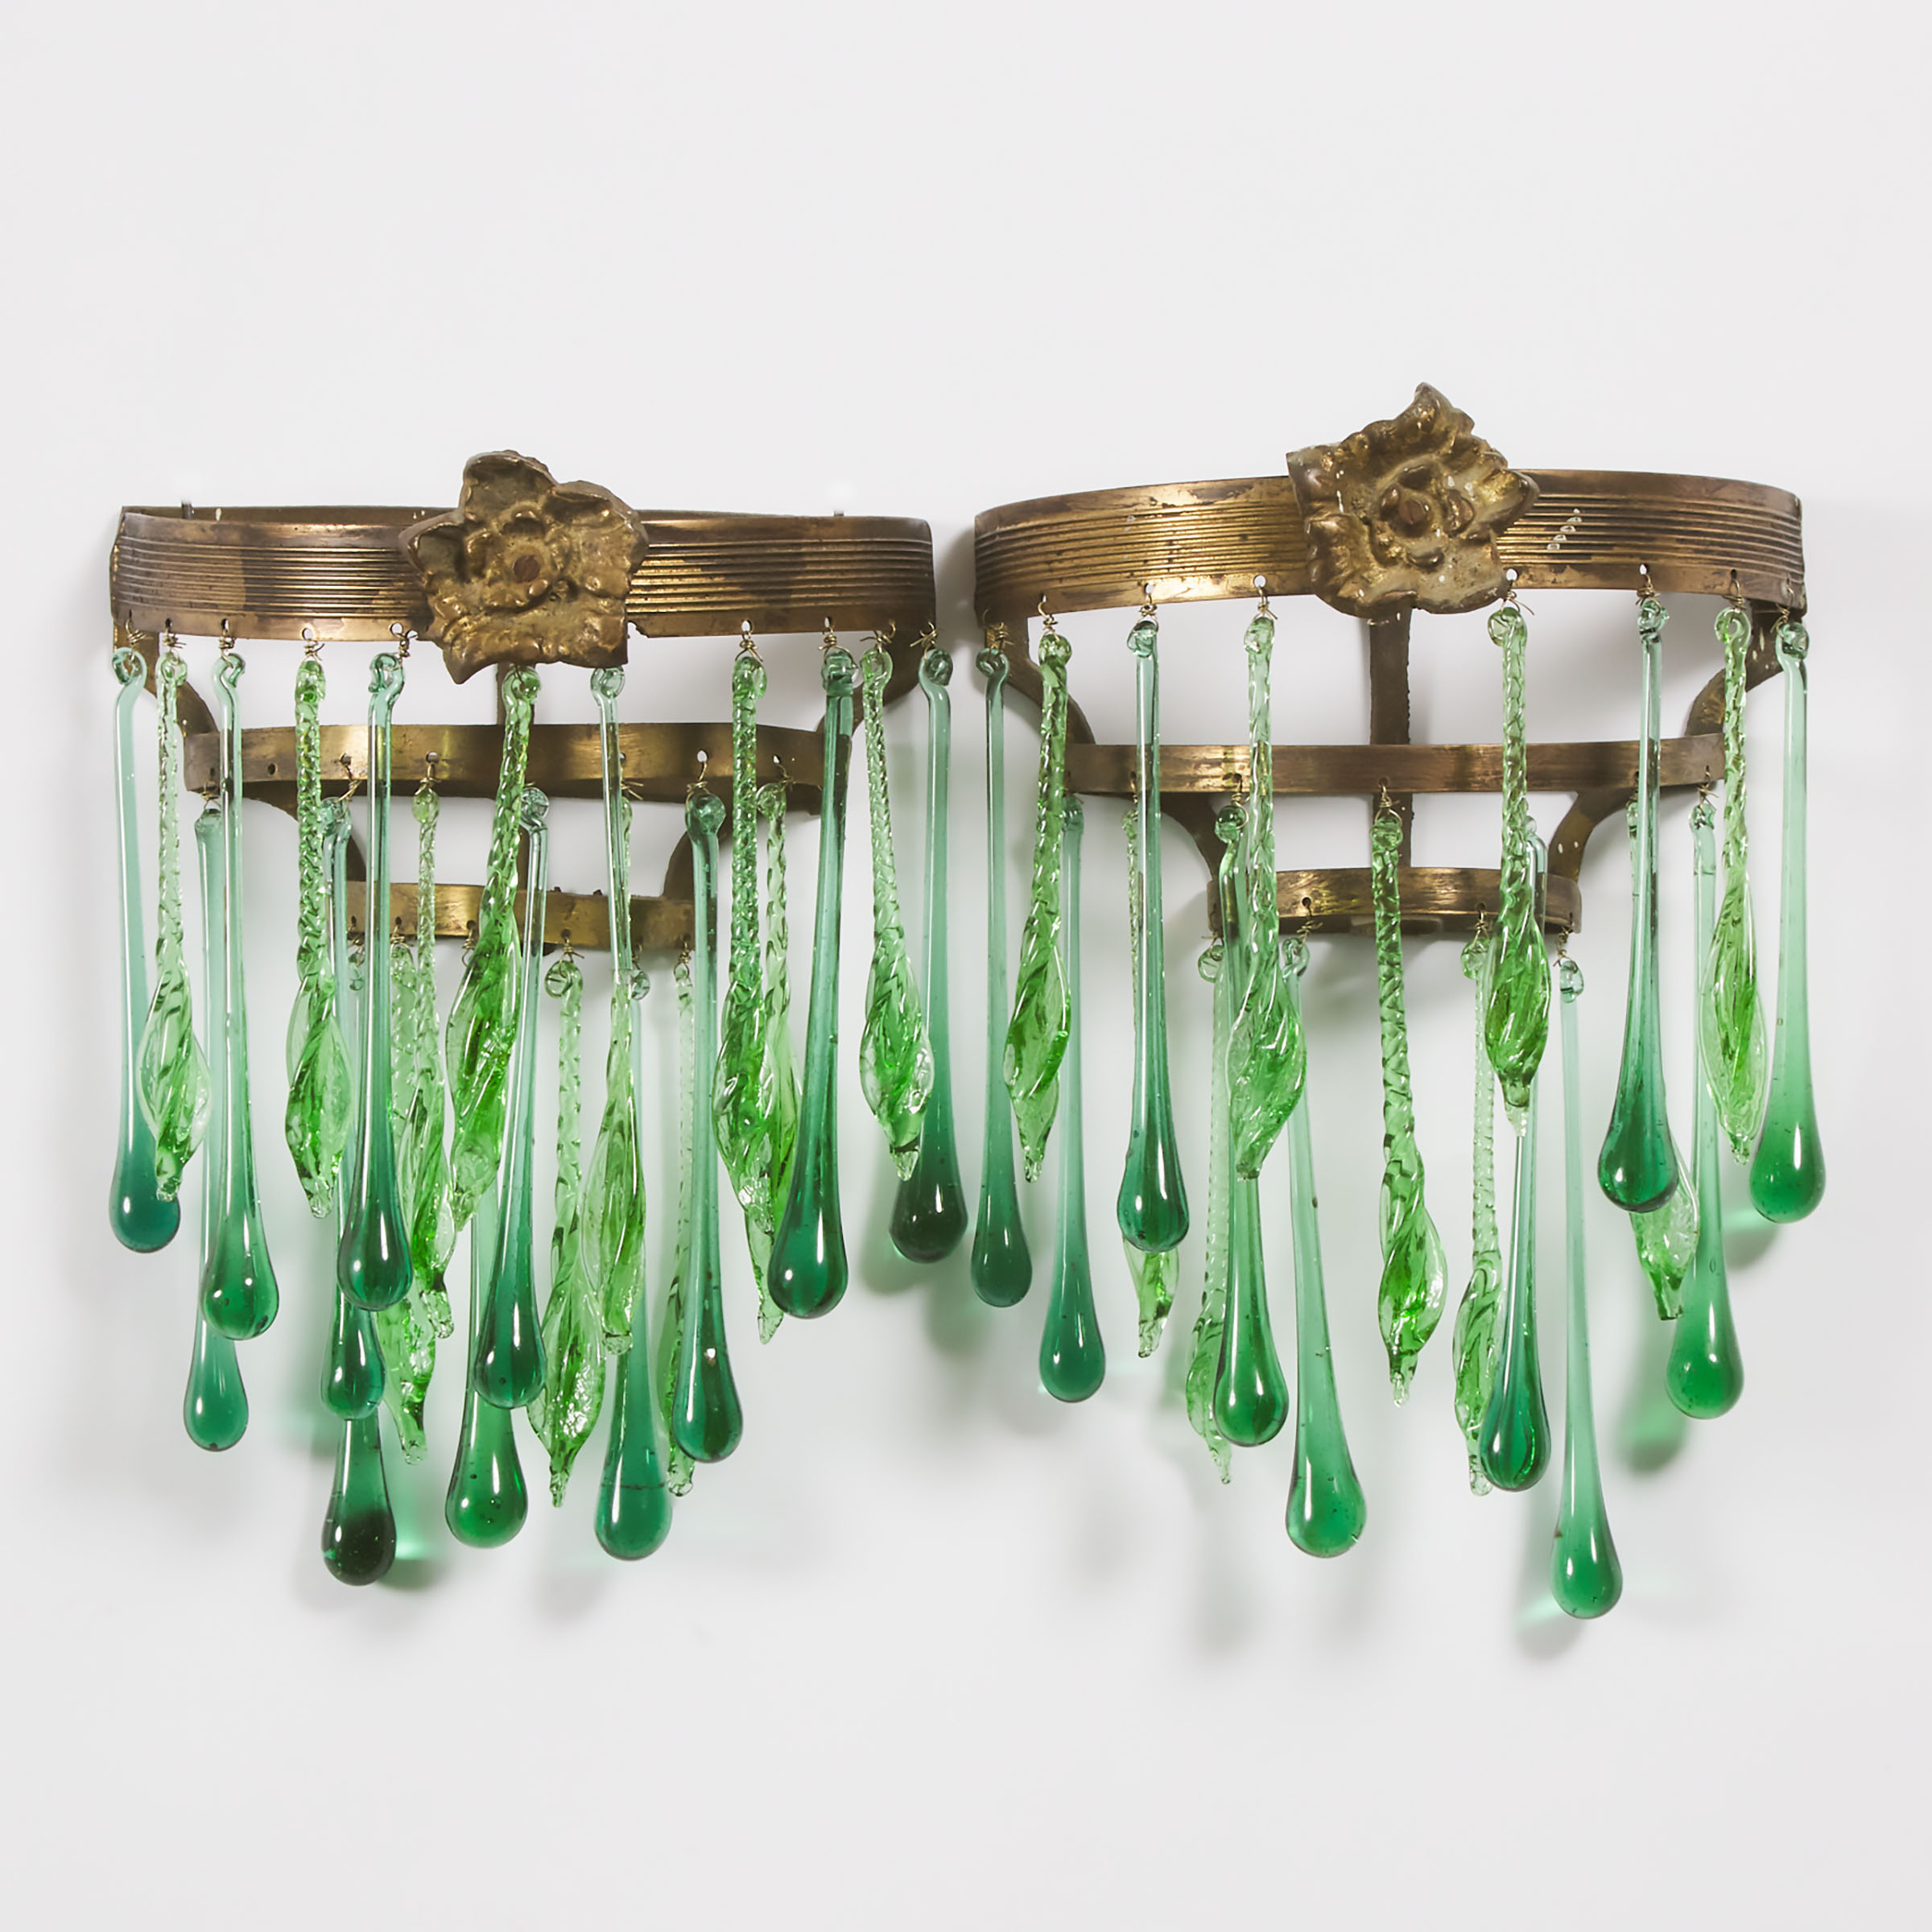 Pair of French Art Deco Gilt Bronze and Green Glass Drop Wall Sconces, c.1925